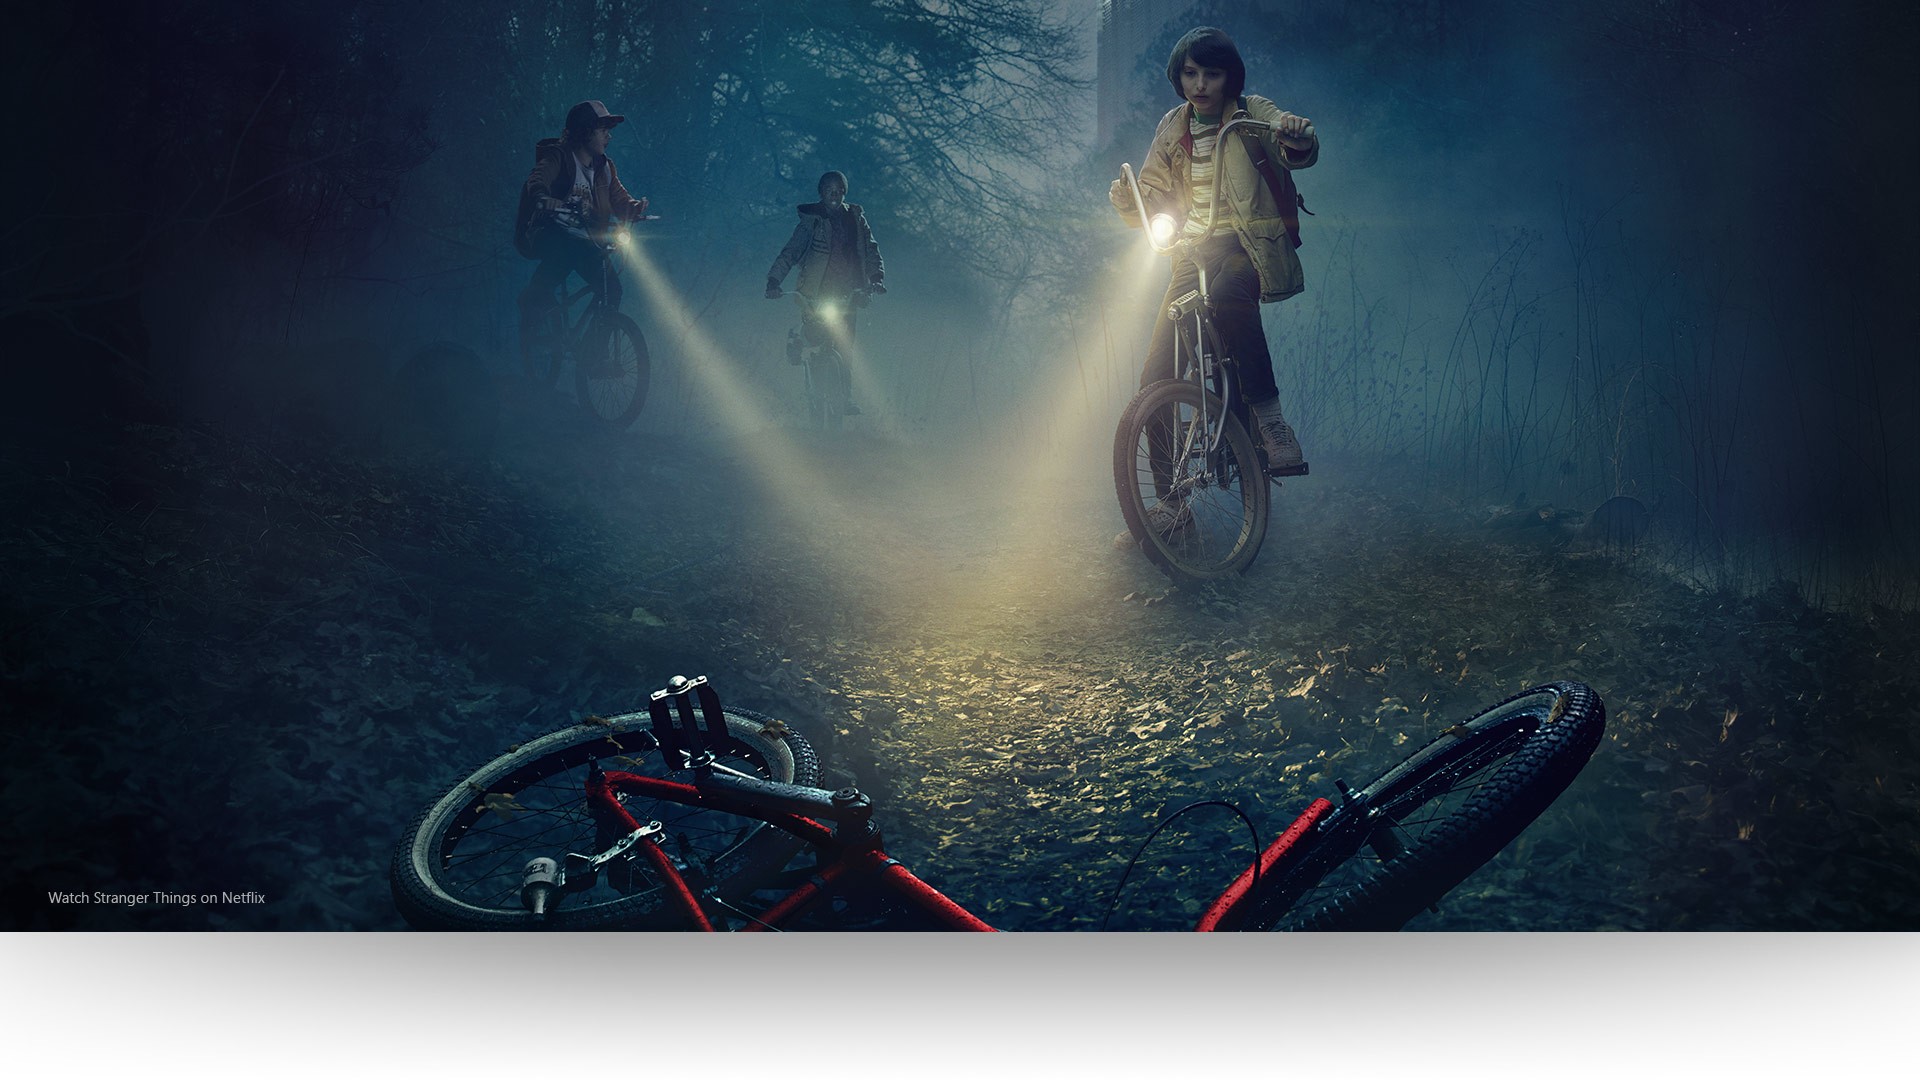 Stranger Things – Dustin, Lucas, and Mike shine their lights on an abandoned bicycle on a gloomy forest path. Watch Stranger Things on Netflix.